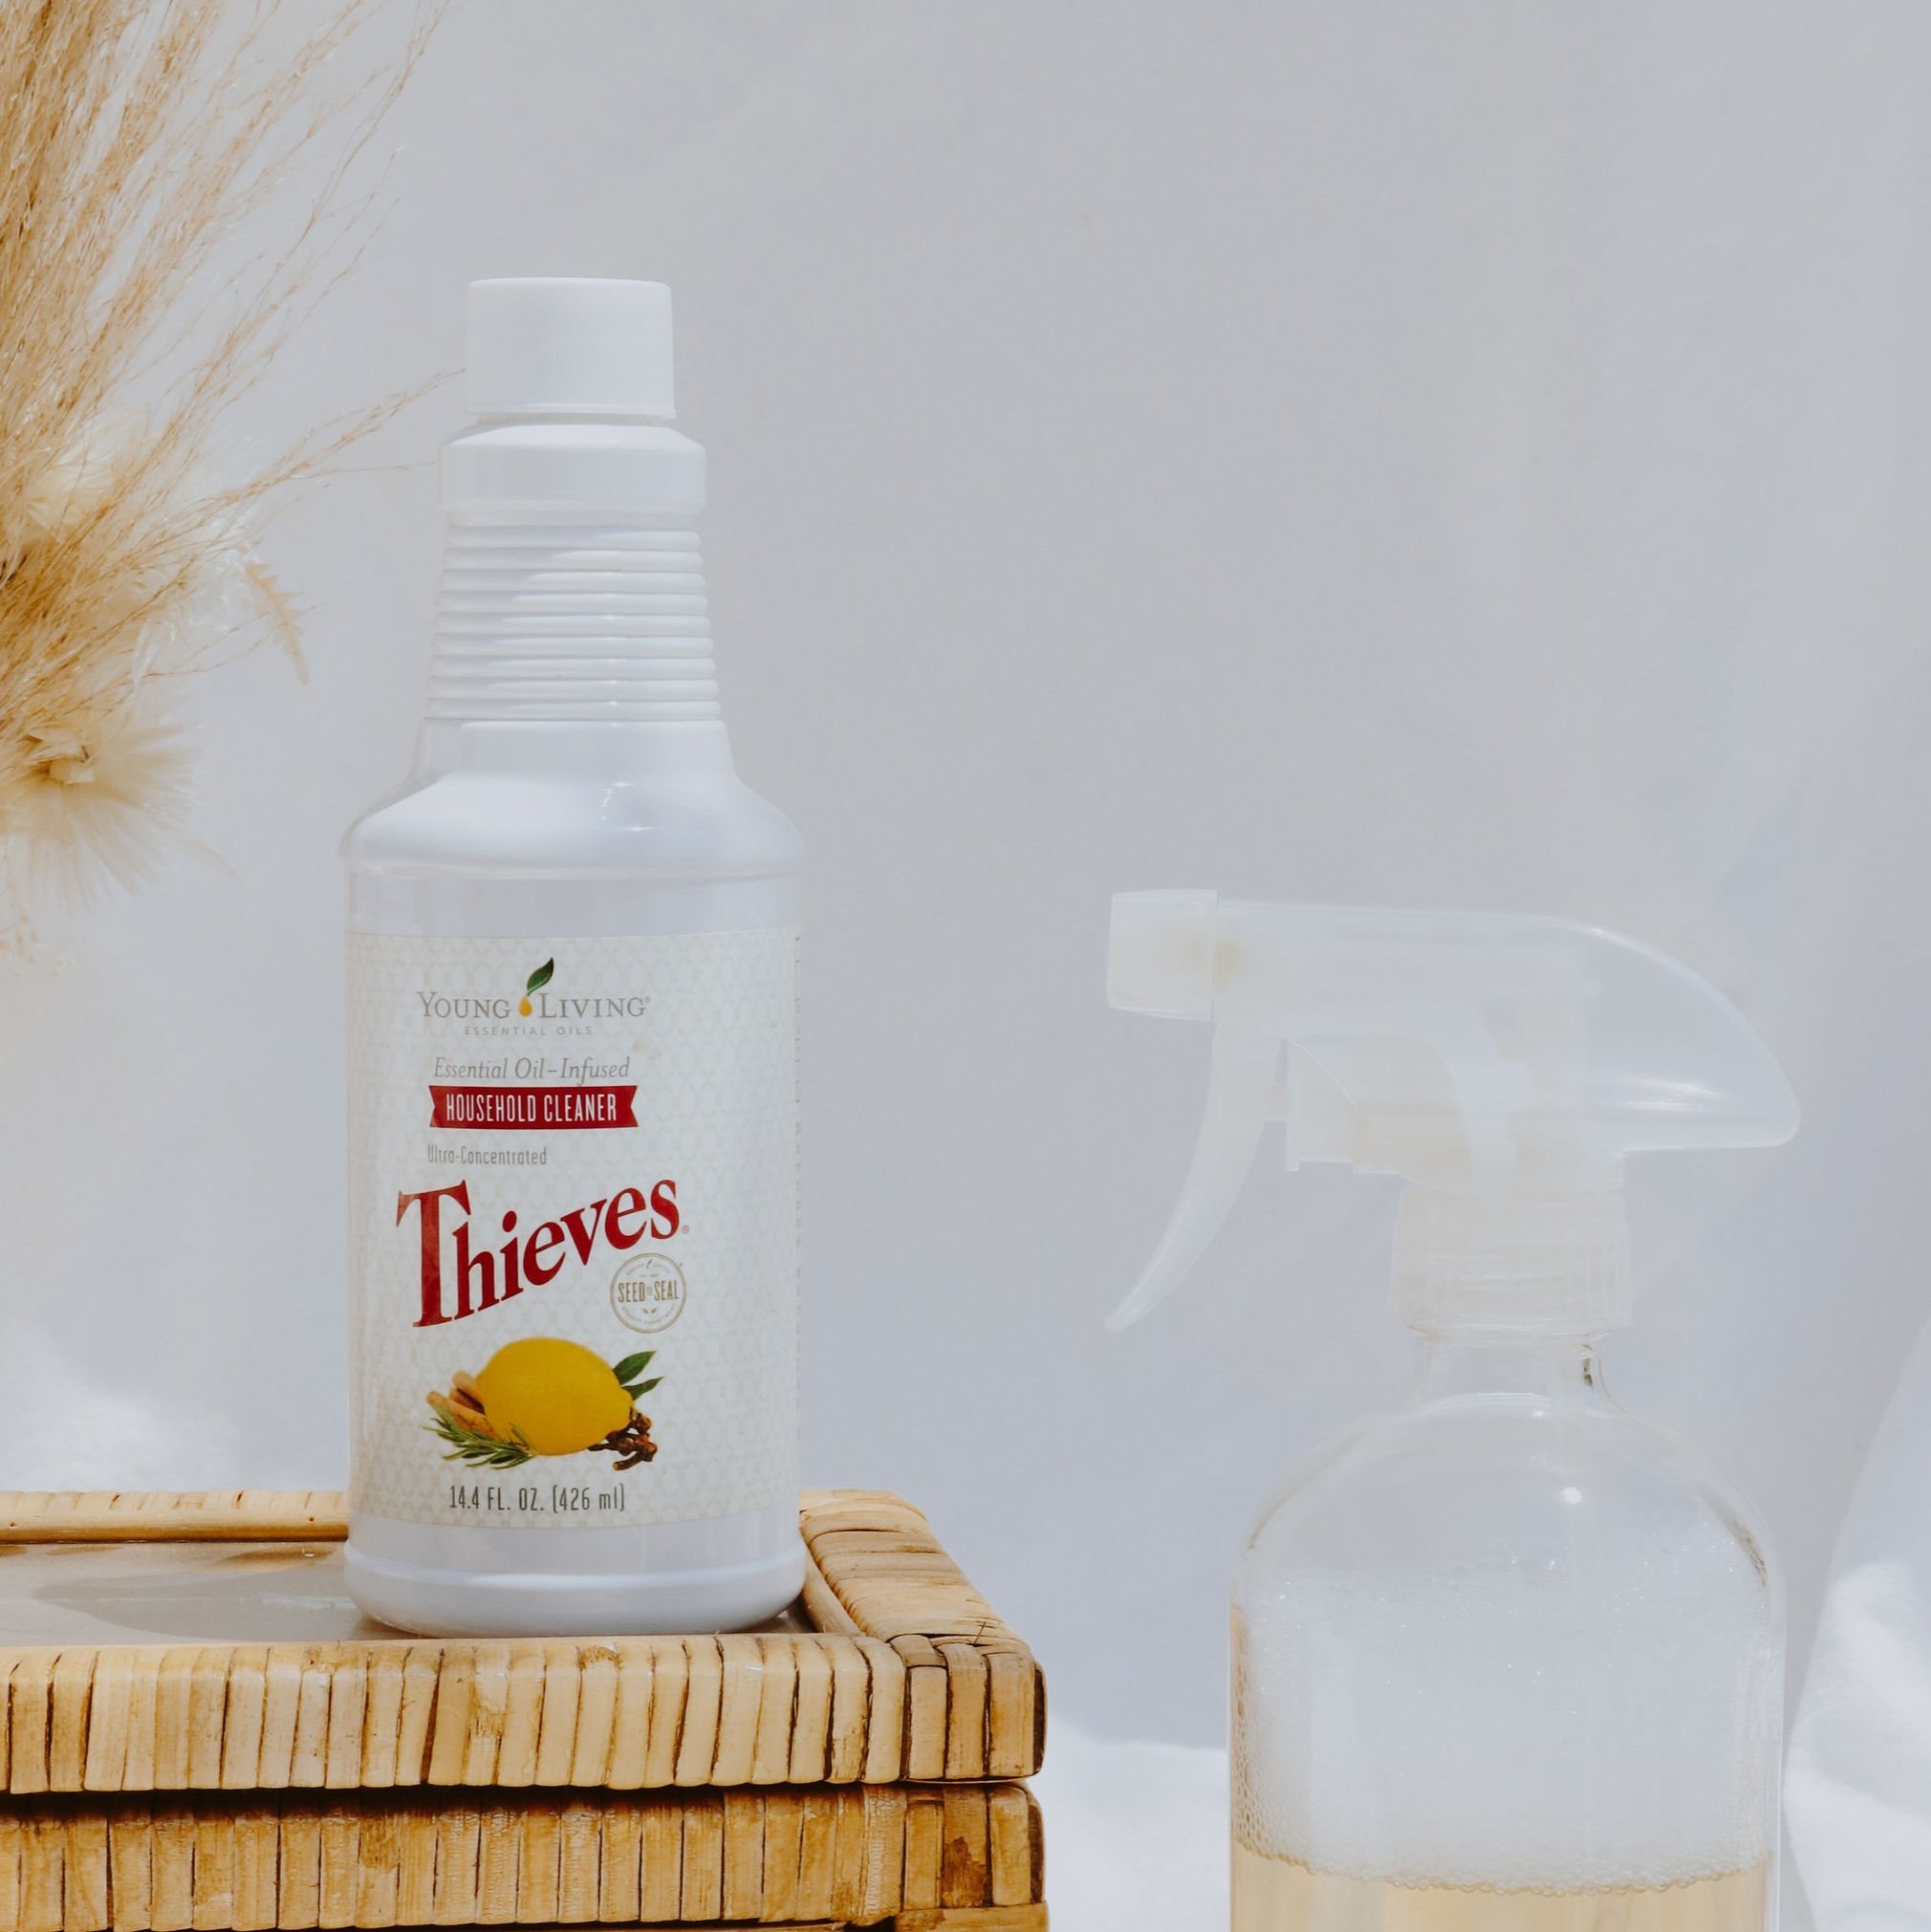 Thieves Essential Oil-Infused 6X Ultra Concentrated Laundry Soap Fresh Citrus Scent 32 fl oz 946 ml by Young Living